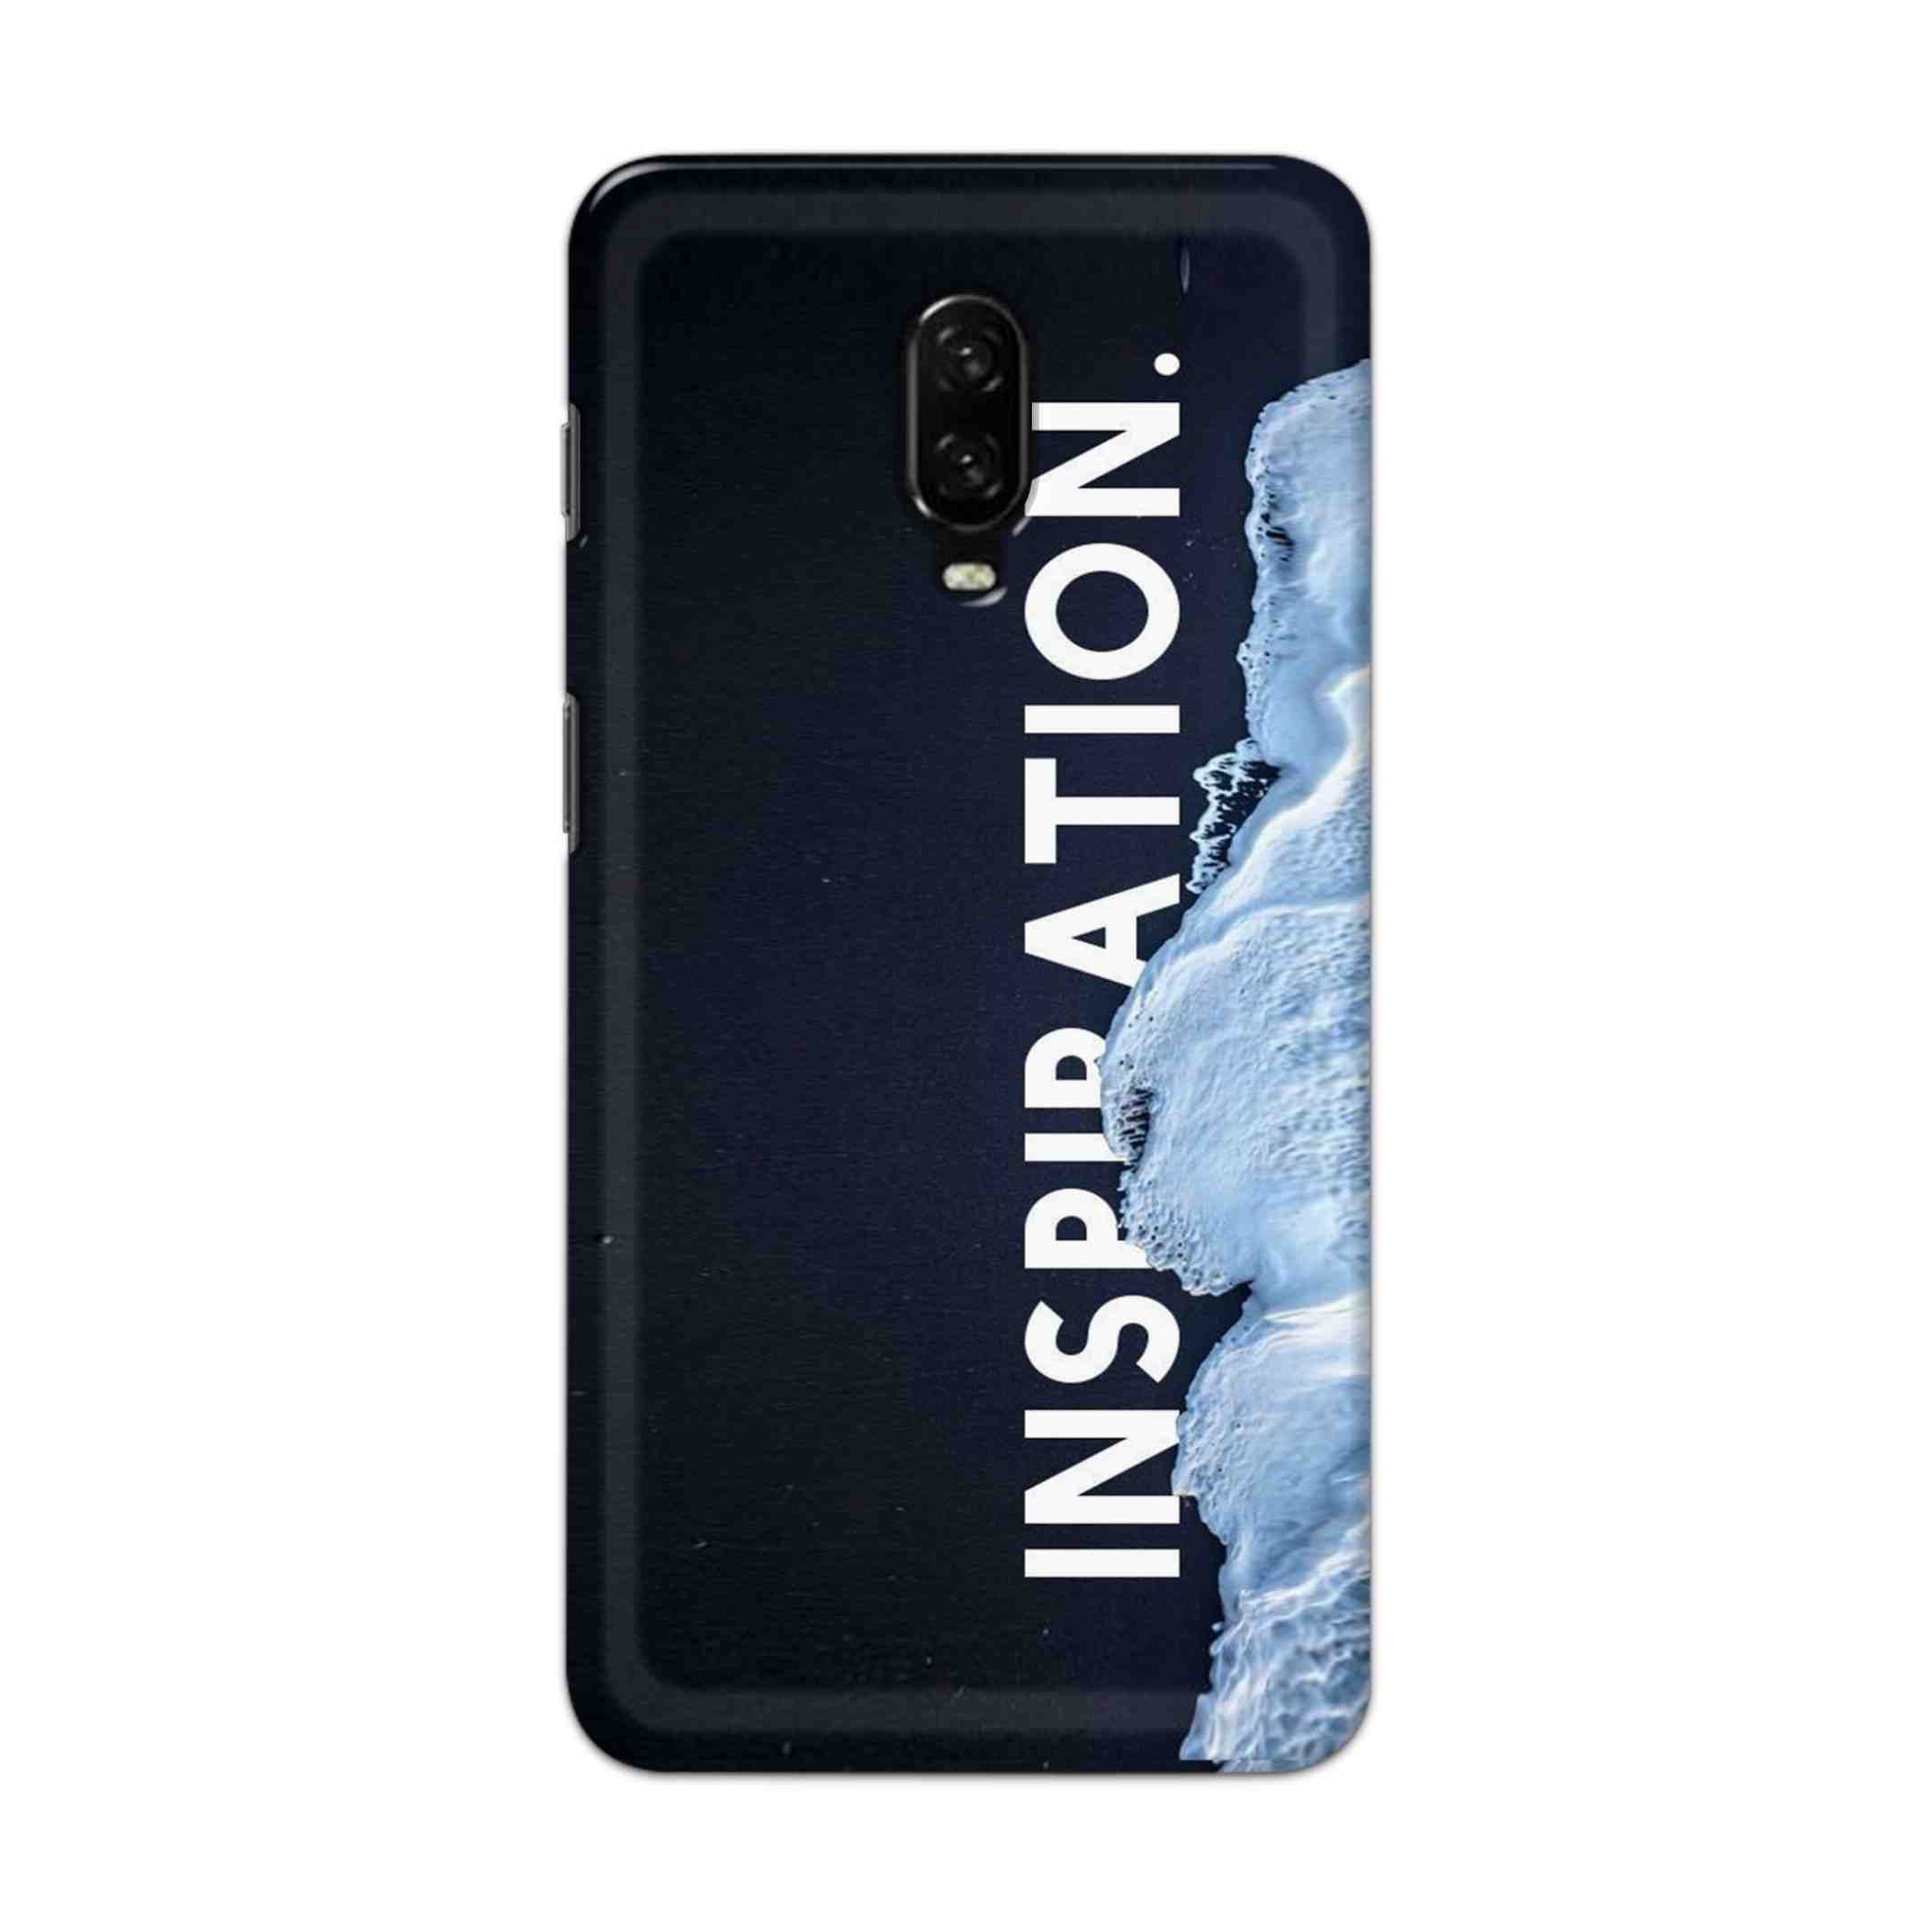 Buy Inspiration Hard Back Mobile Phone Case Cover For OnePlus 6T Online